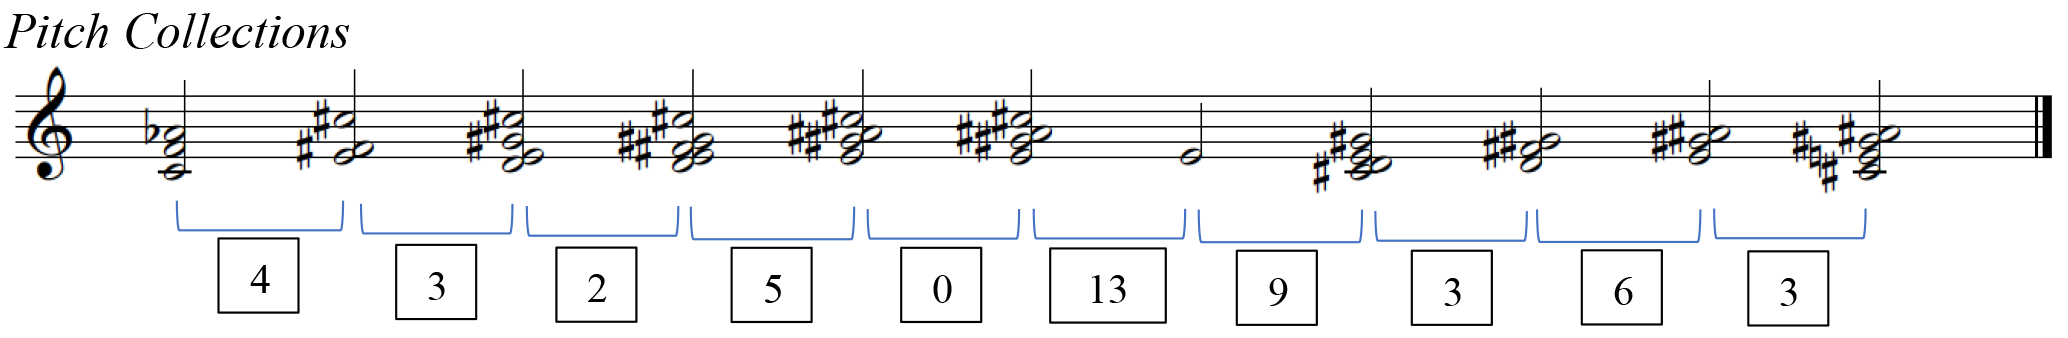 A staff labeled Pitch Collections with a treble clef containing notes and corresponding numbers between them.